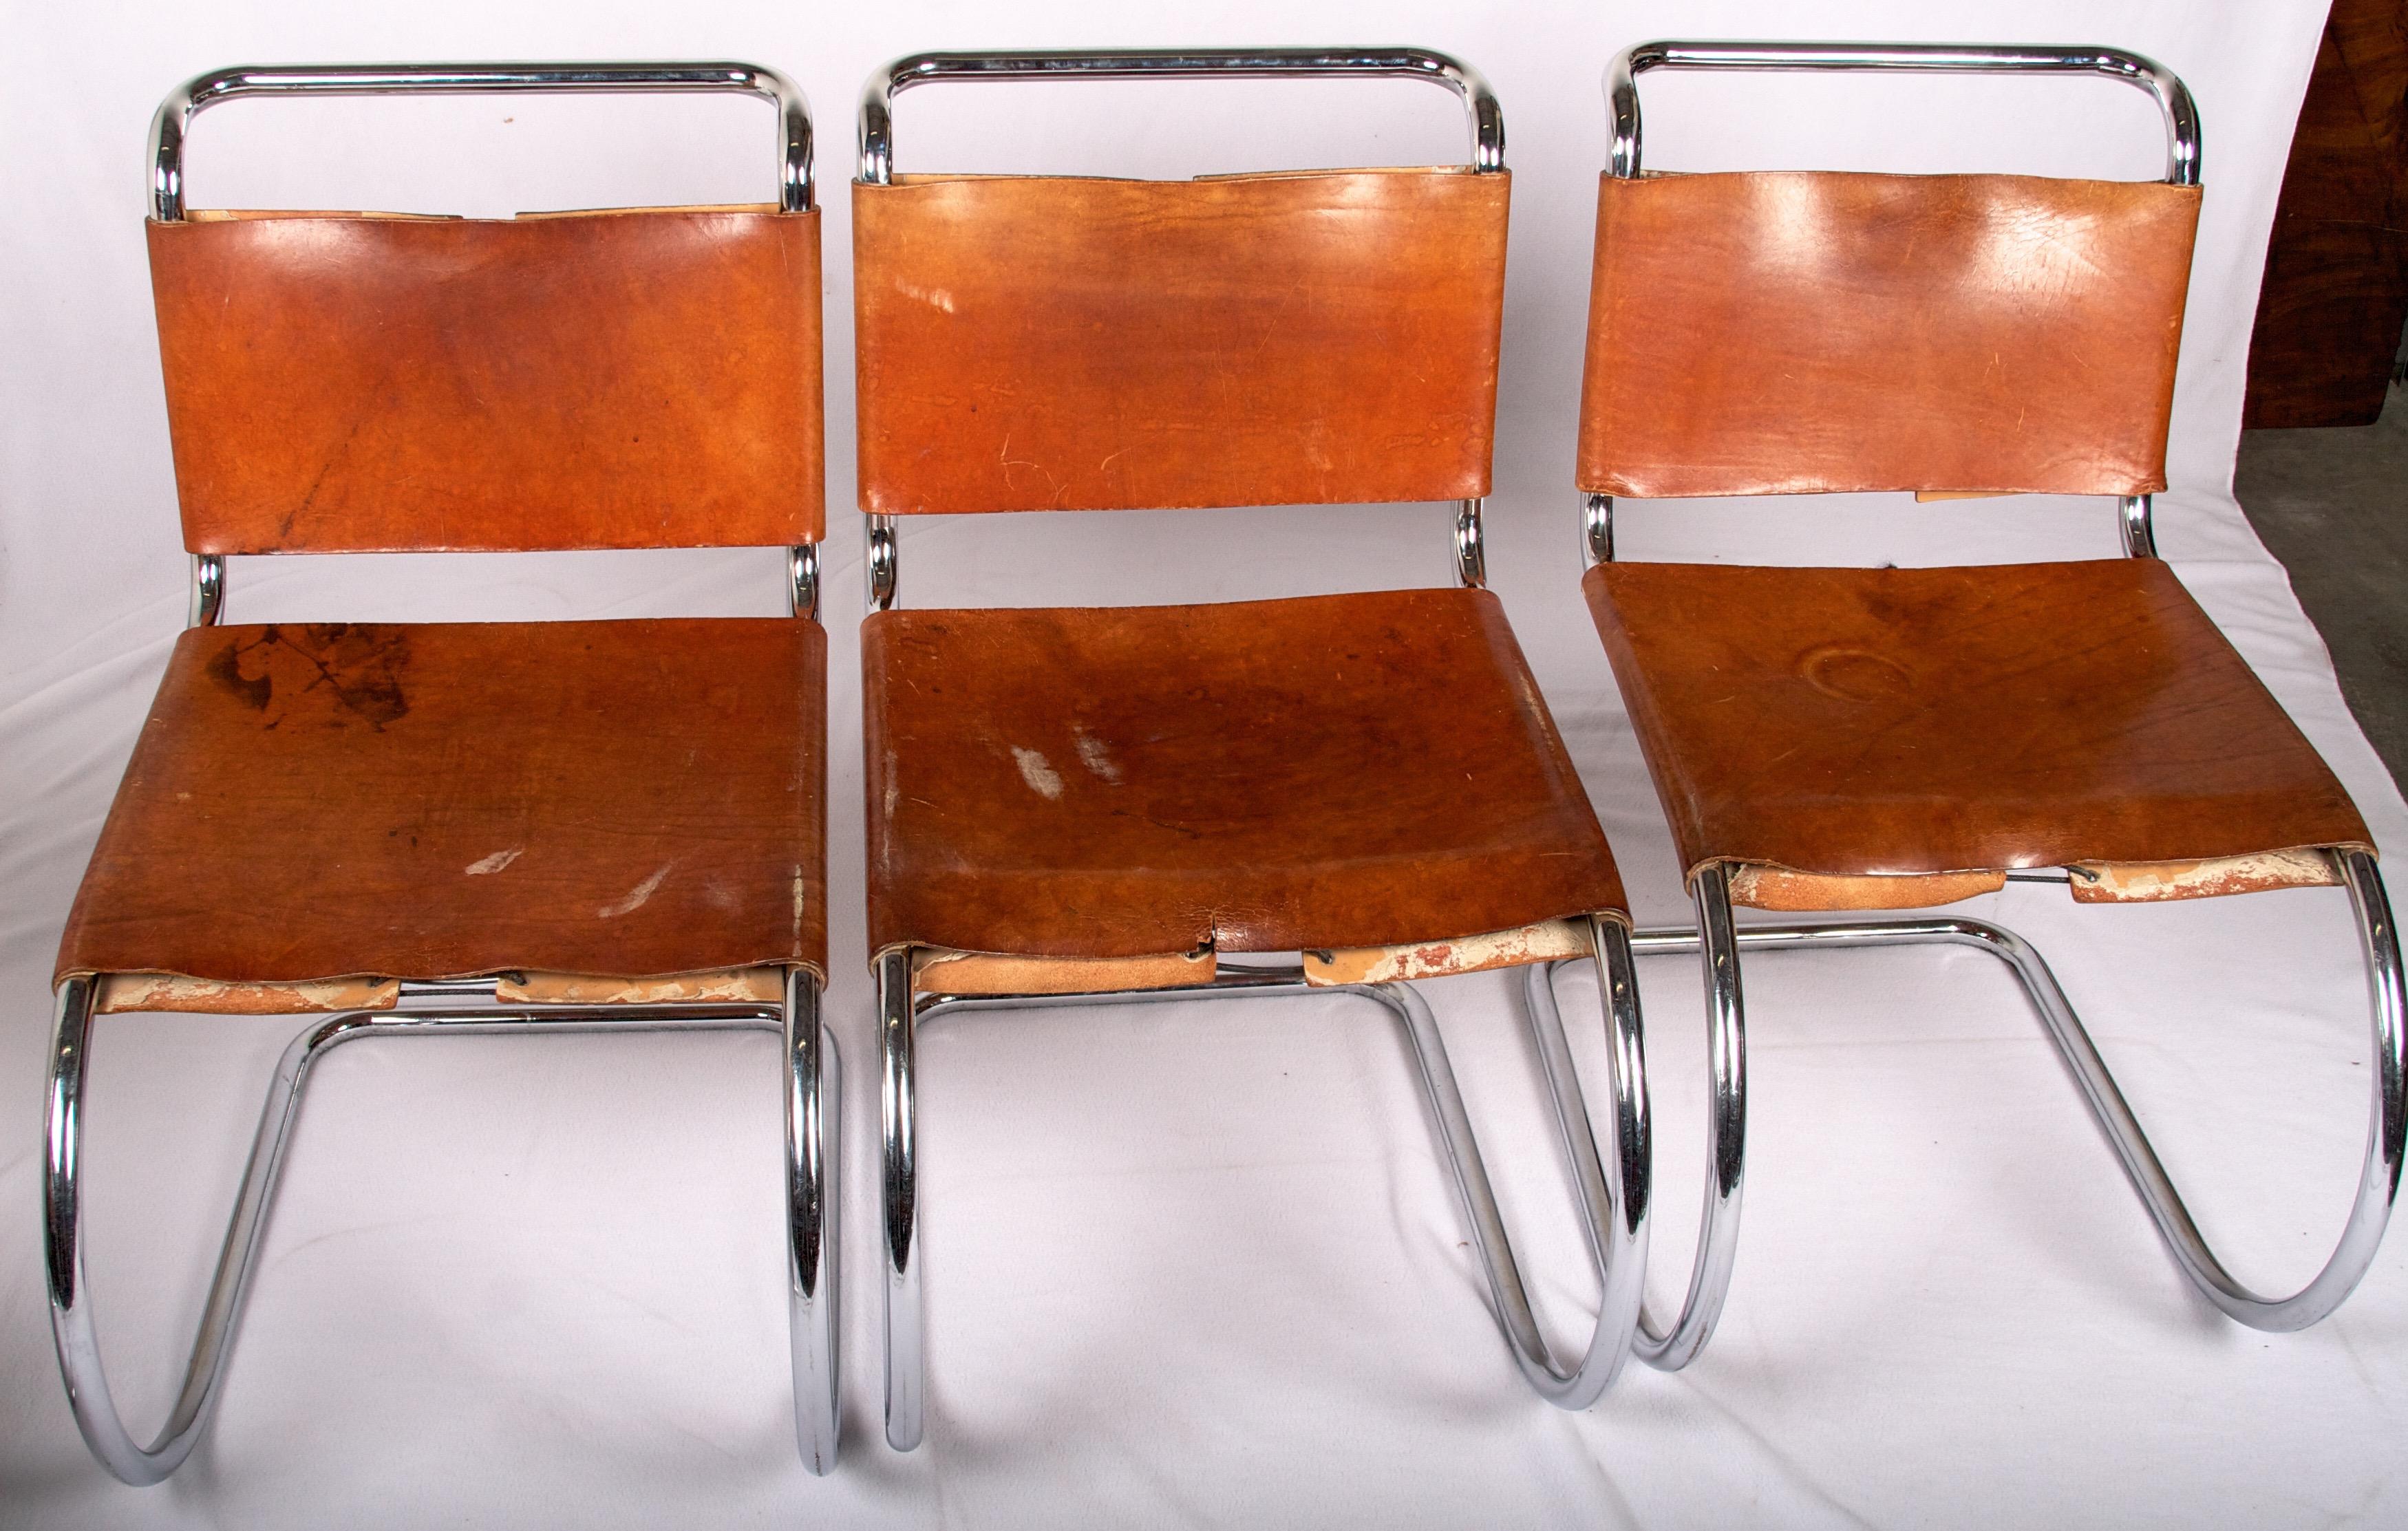 These chairs bear the famous Italian Maker Label, Bononia, from who's owner and creator, Dino
Gavina, Knoll purchased the company and rights to it's inventory.
No restoration has been done to these chairs. The leather is original, the lacing is